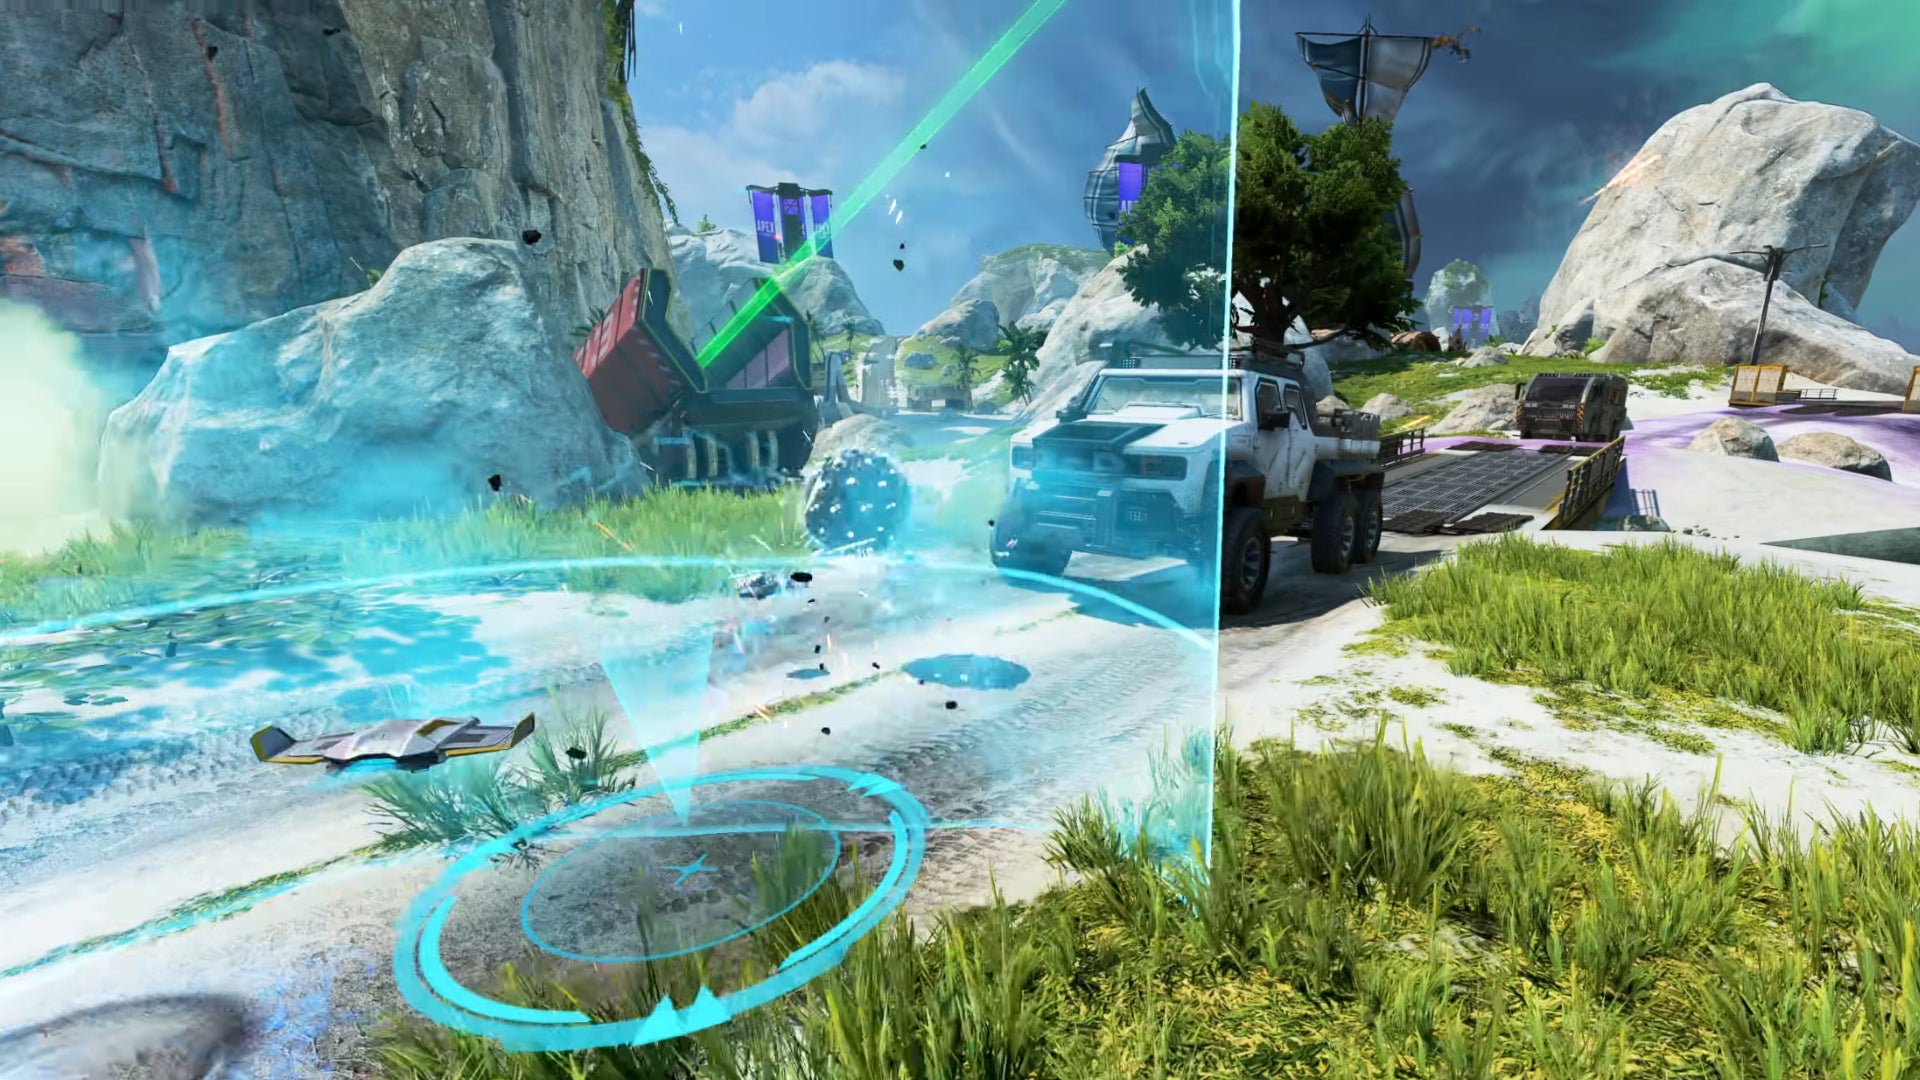 Newcastle in Apex Legends places down his Mobile Shield to reflect Mad Maggie's Wrecking Ball.